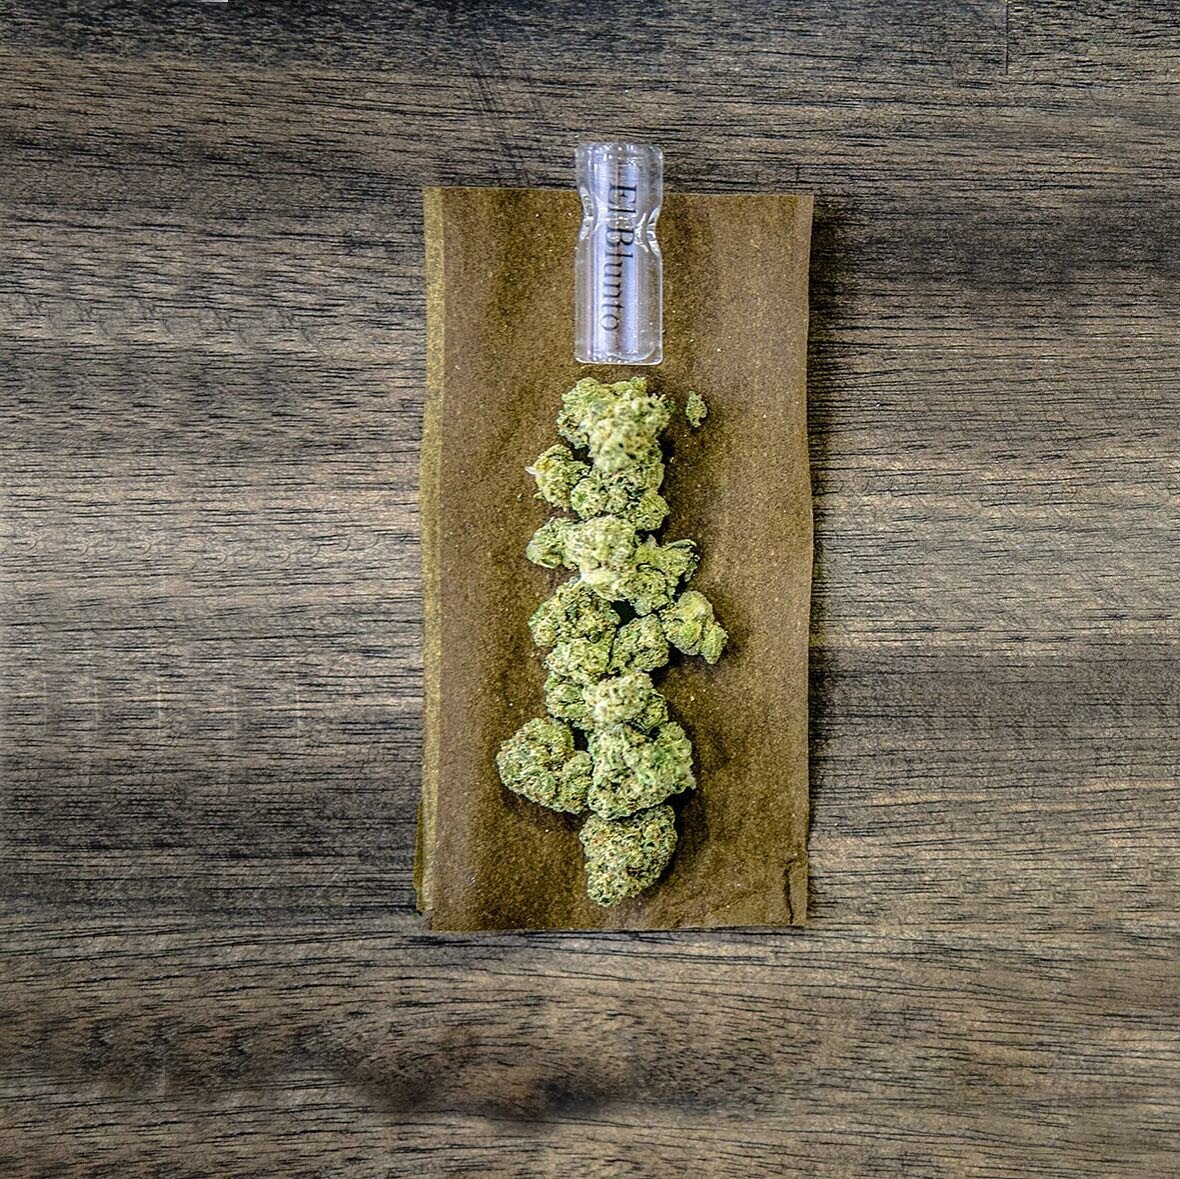 Experience a pre-roll collaboration like no other. Top shelf @claybourne_co, indoor full flower is hand broken and hand rolled by master cannabis cigar makers and finished with a glass filter tip for optimal airflow. We strictly used #Claybournes #Go